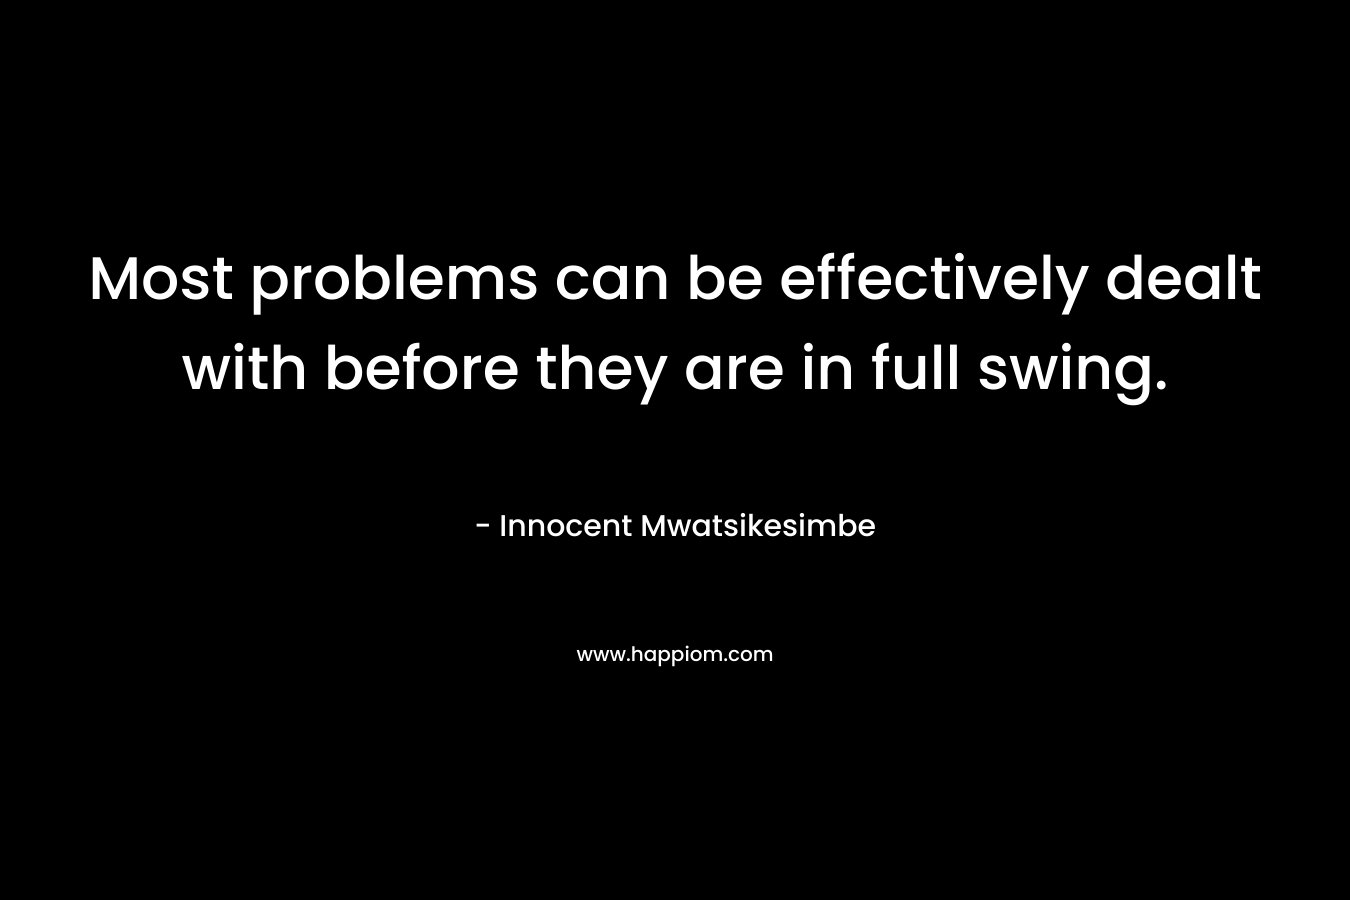 Most problems can be effectively dealt with before they are in full swing. – Innocent Mwatsikesimbe